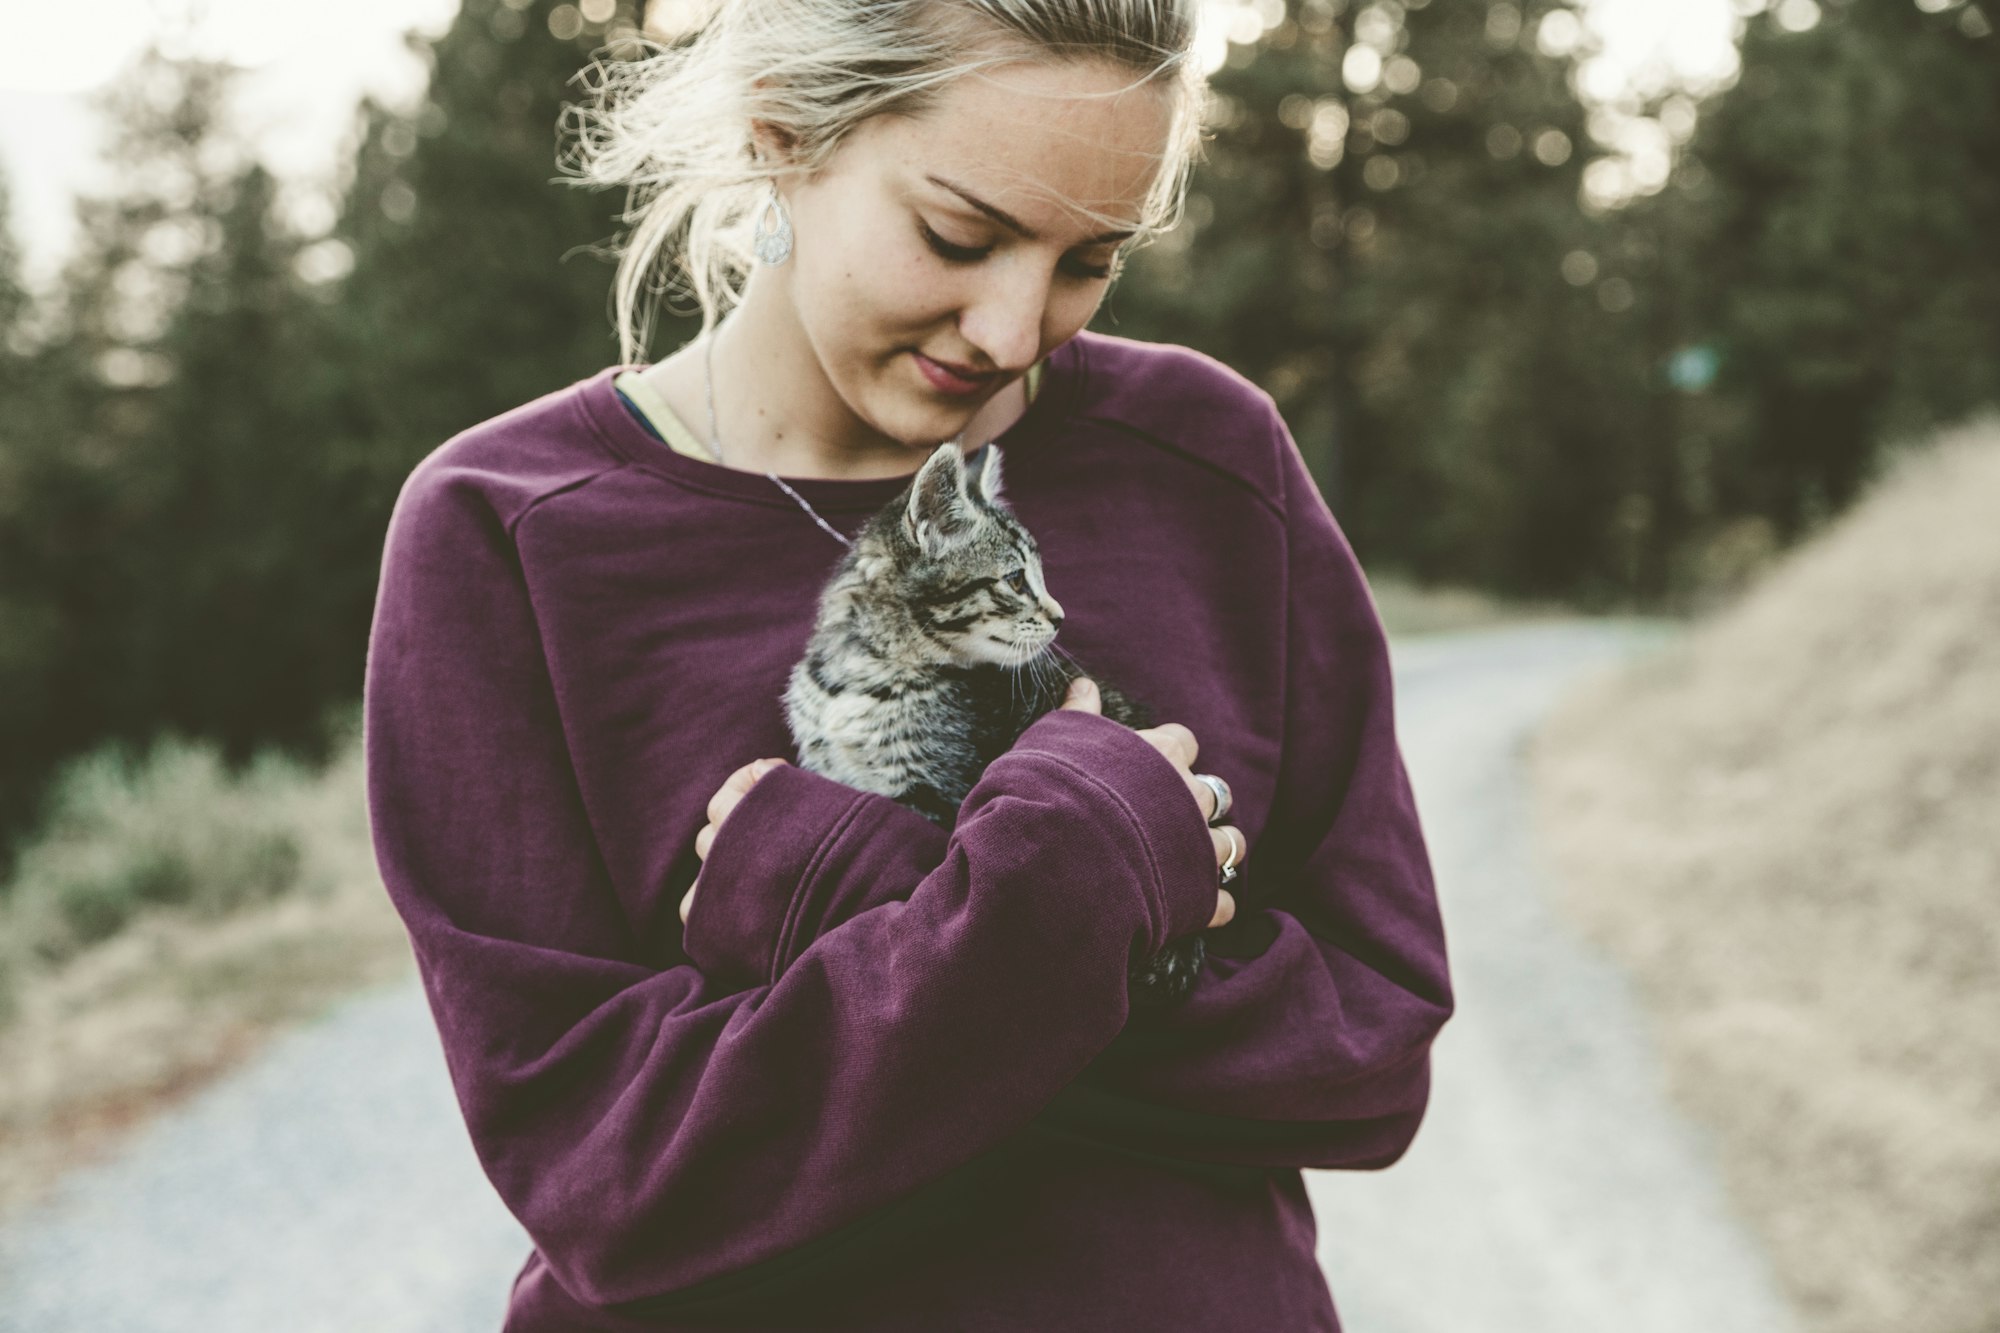 We were out shooting some portraits, and this kitten just walks up to us right in the middle of our shoot. Eythana was quick to snatch it up and hold the kitty for a minute, so I didn’t hesitate to snap some fun shots.